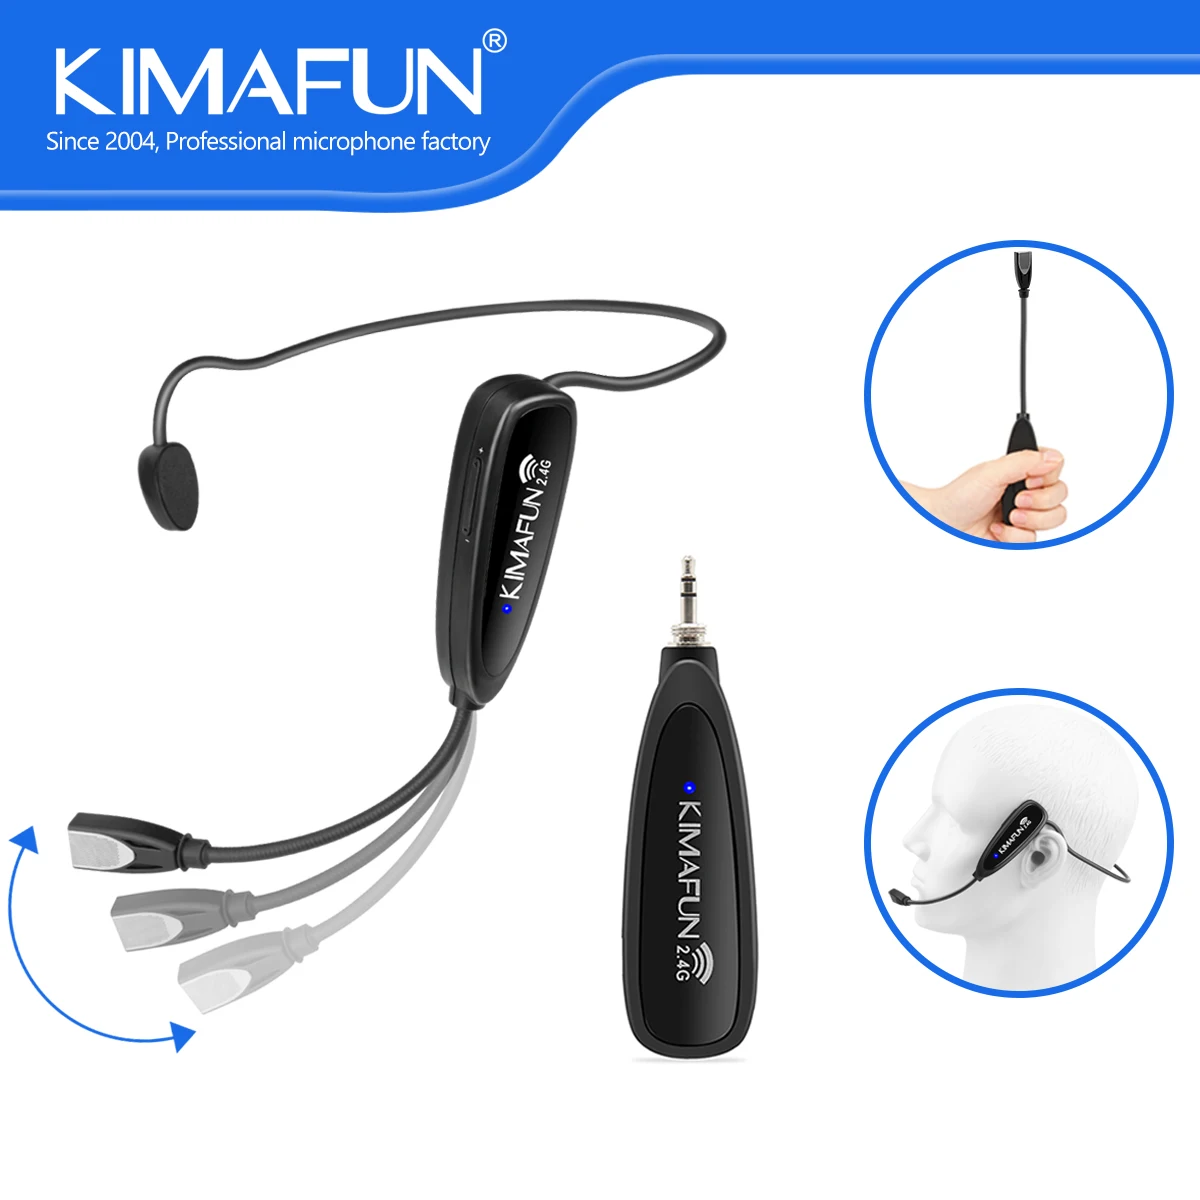 Ship in 24 Hours KIMAFUN Wireless Headset Microphone Waterproof Video Record for DSLR Camera Smartphones Youtube Yoga Fittness